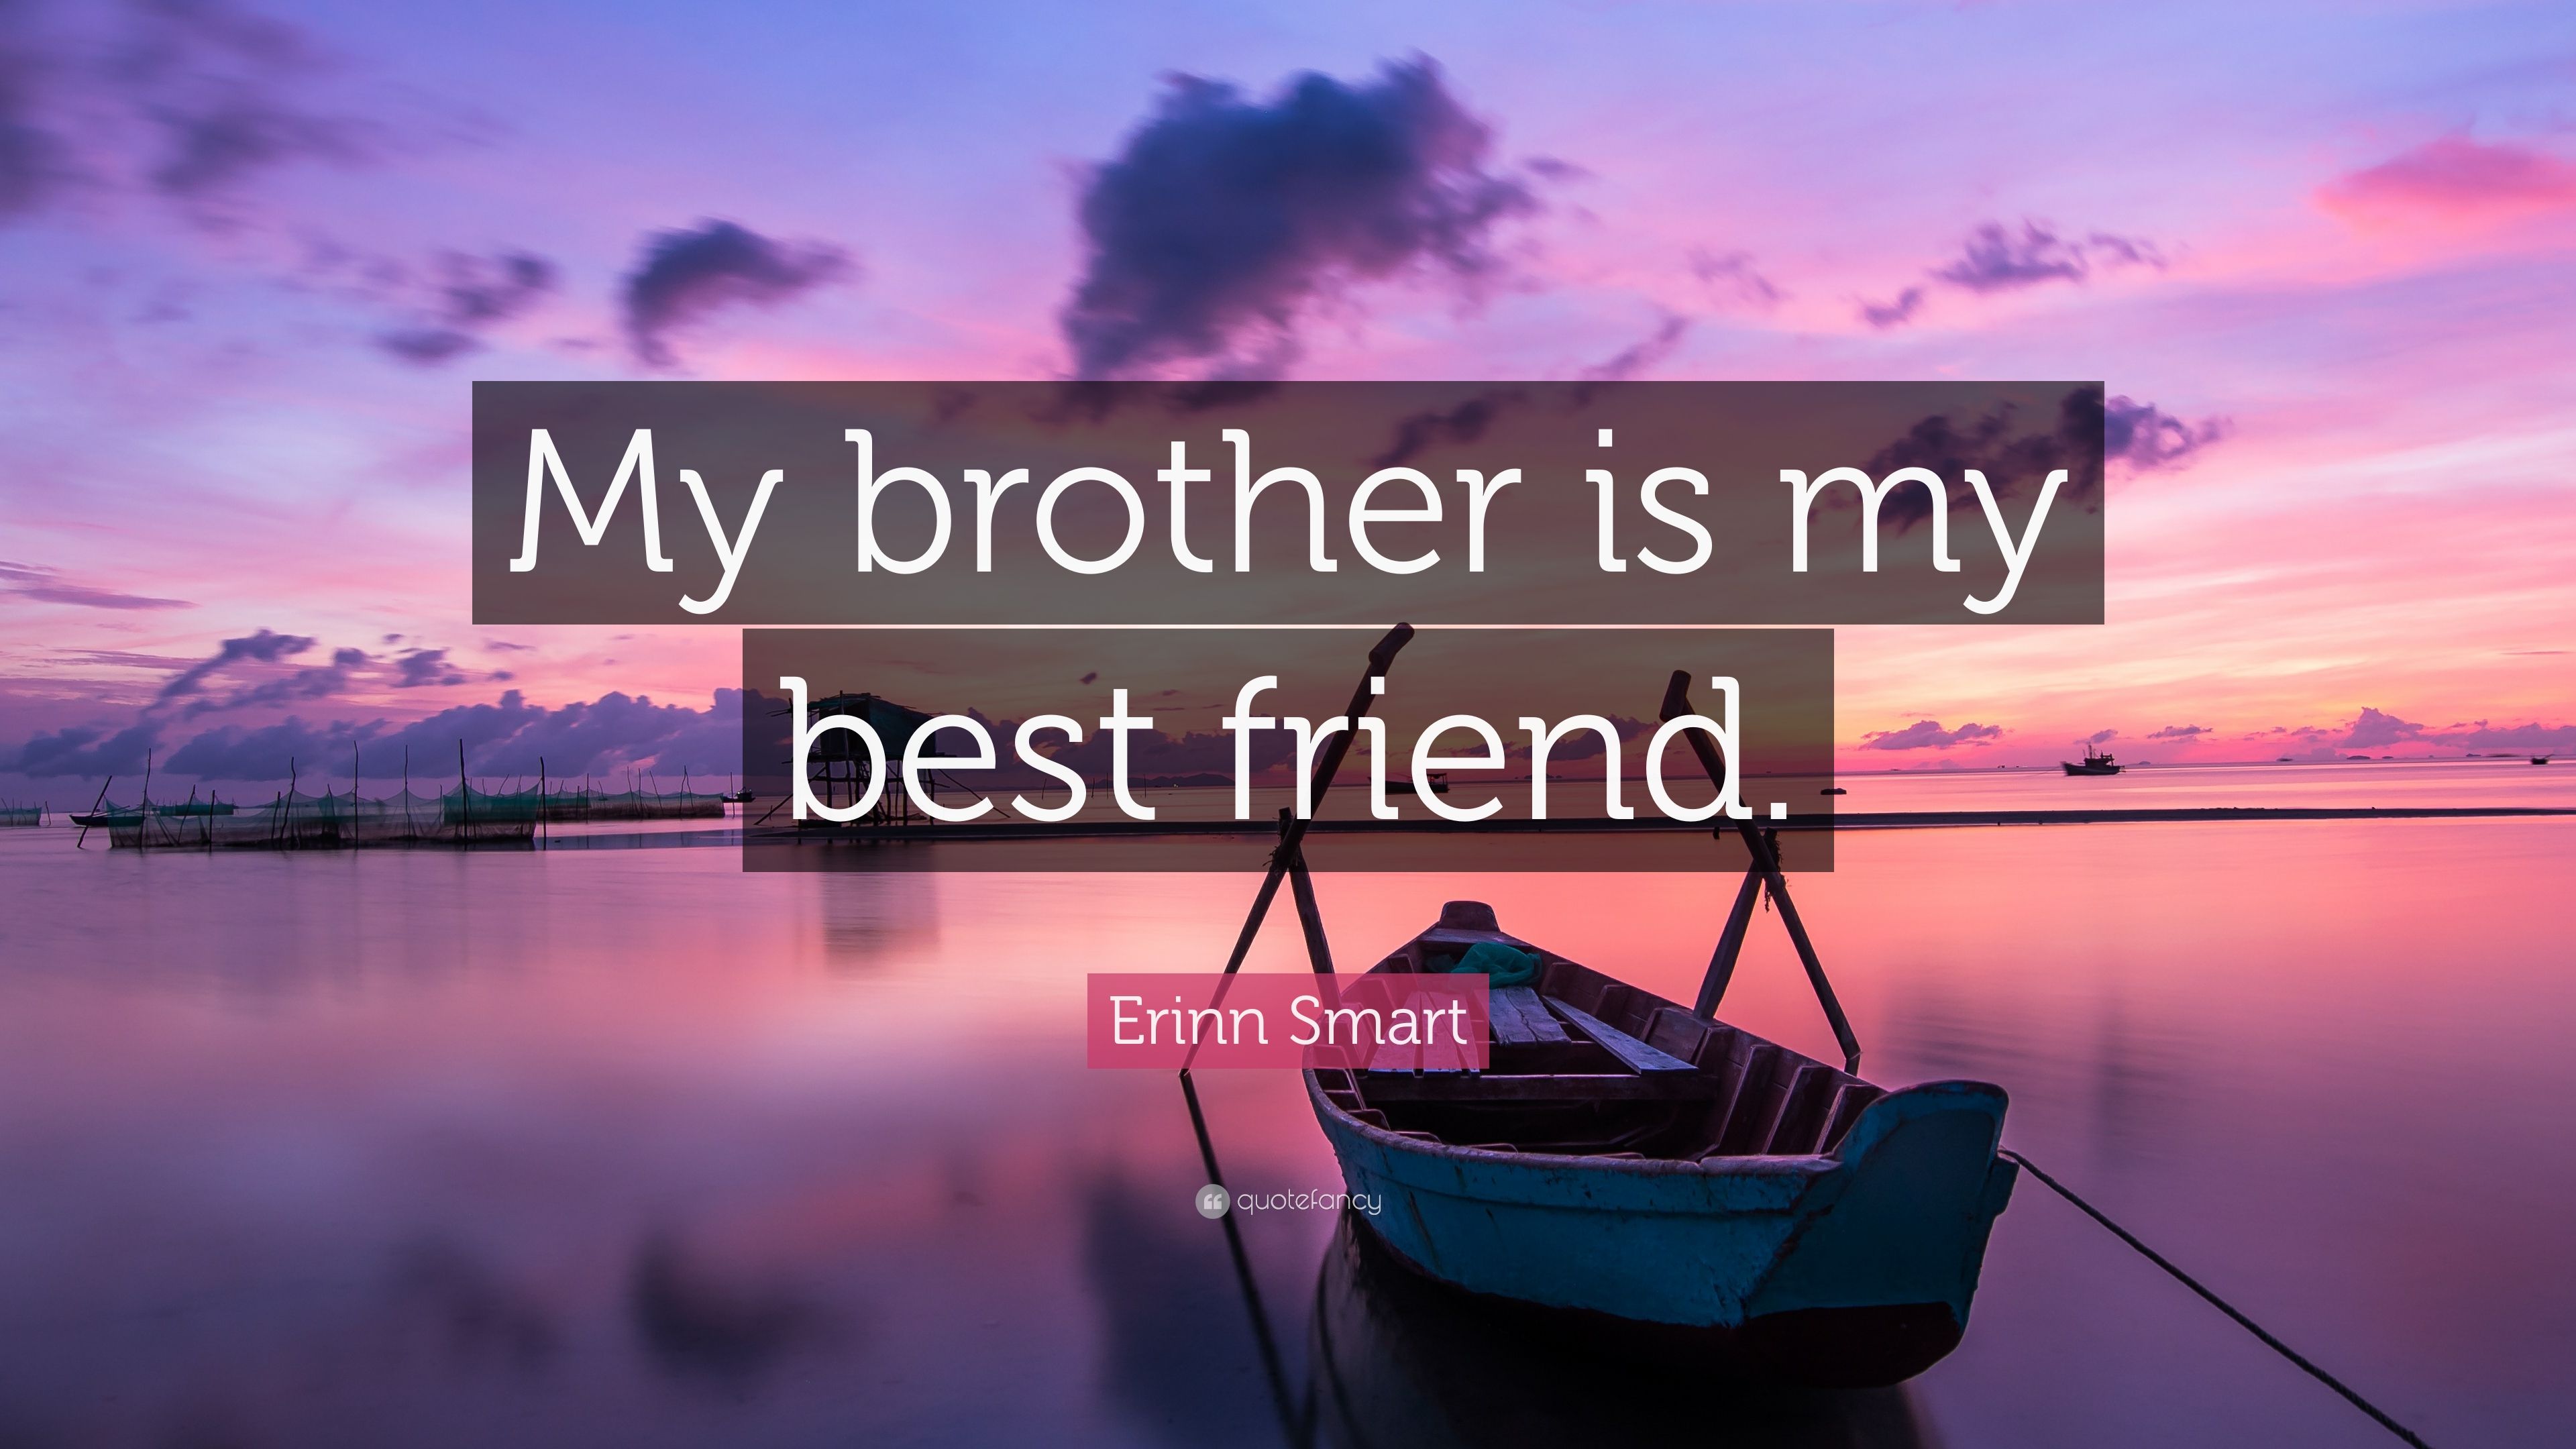 Erinn Smart Quote: “My brother is my best friend.”